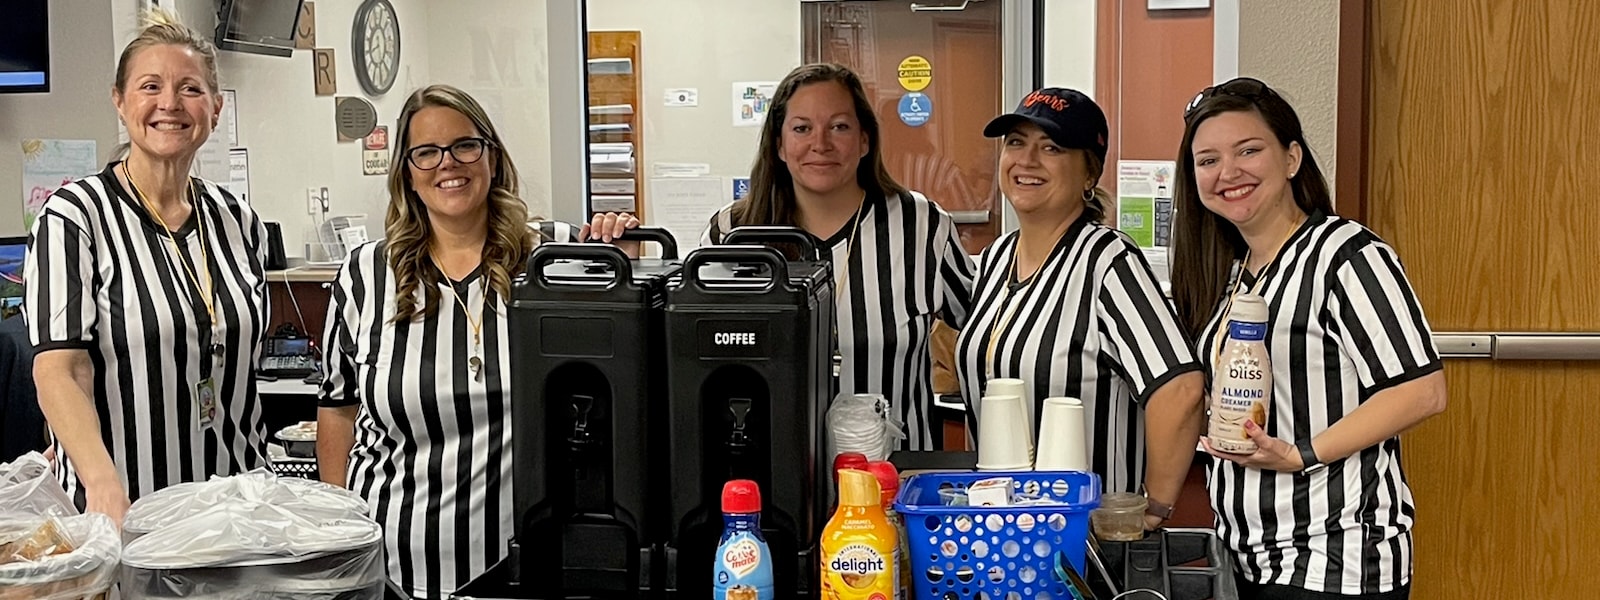 PTA ladies in referee shirts and a coffee cart